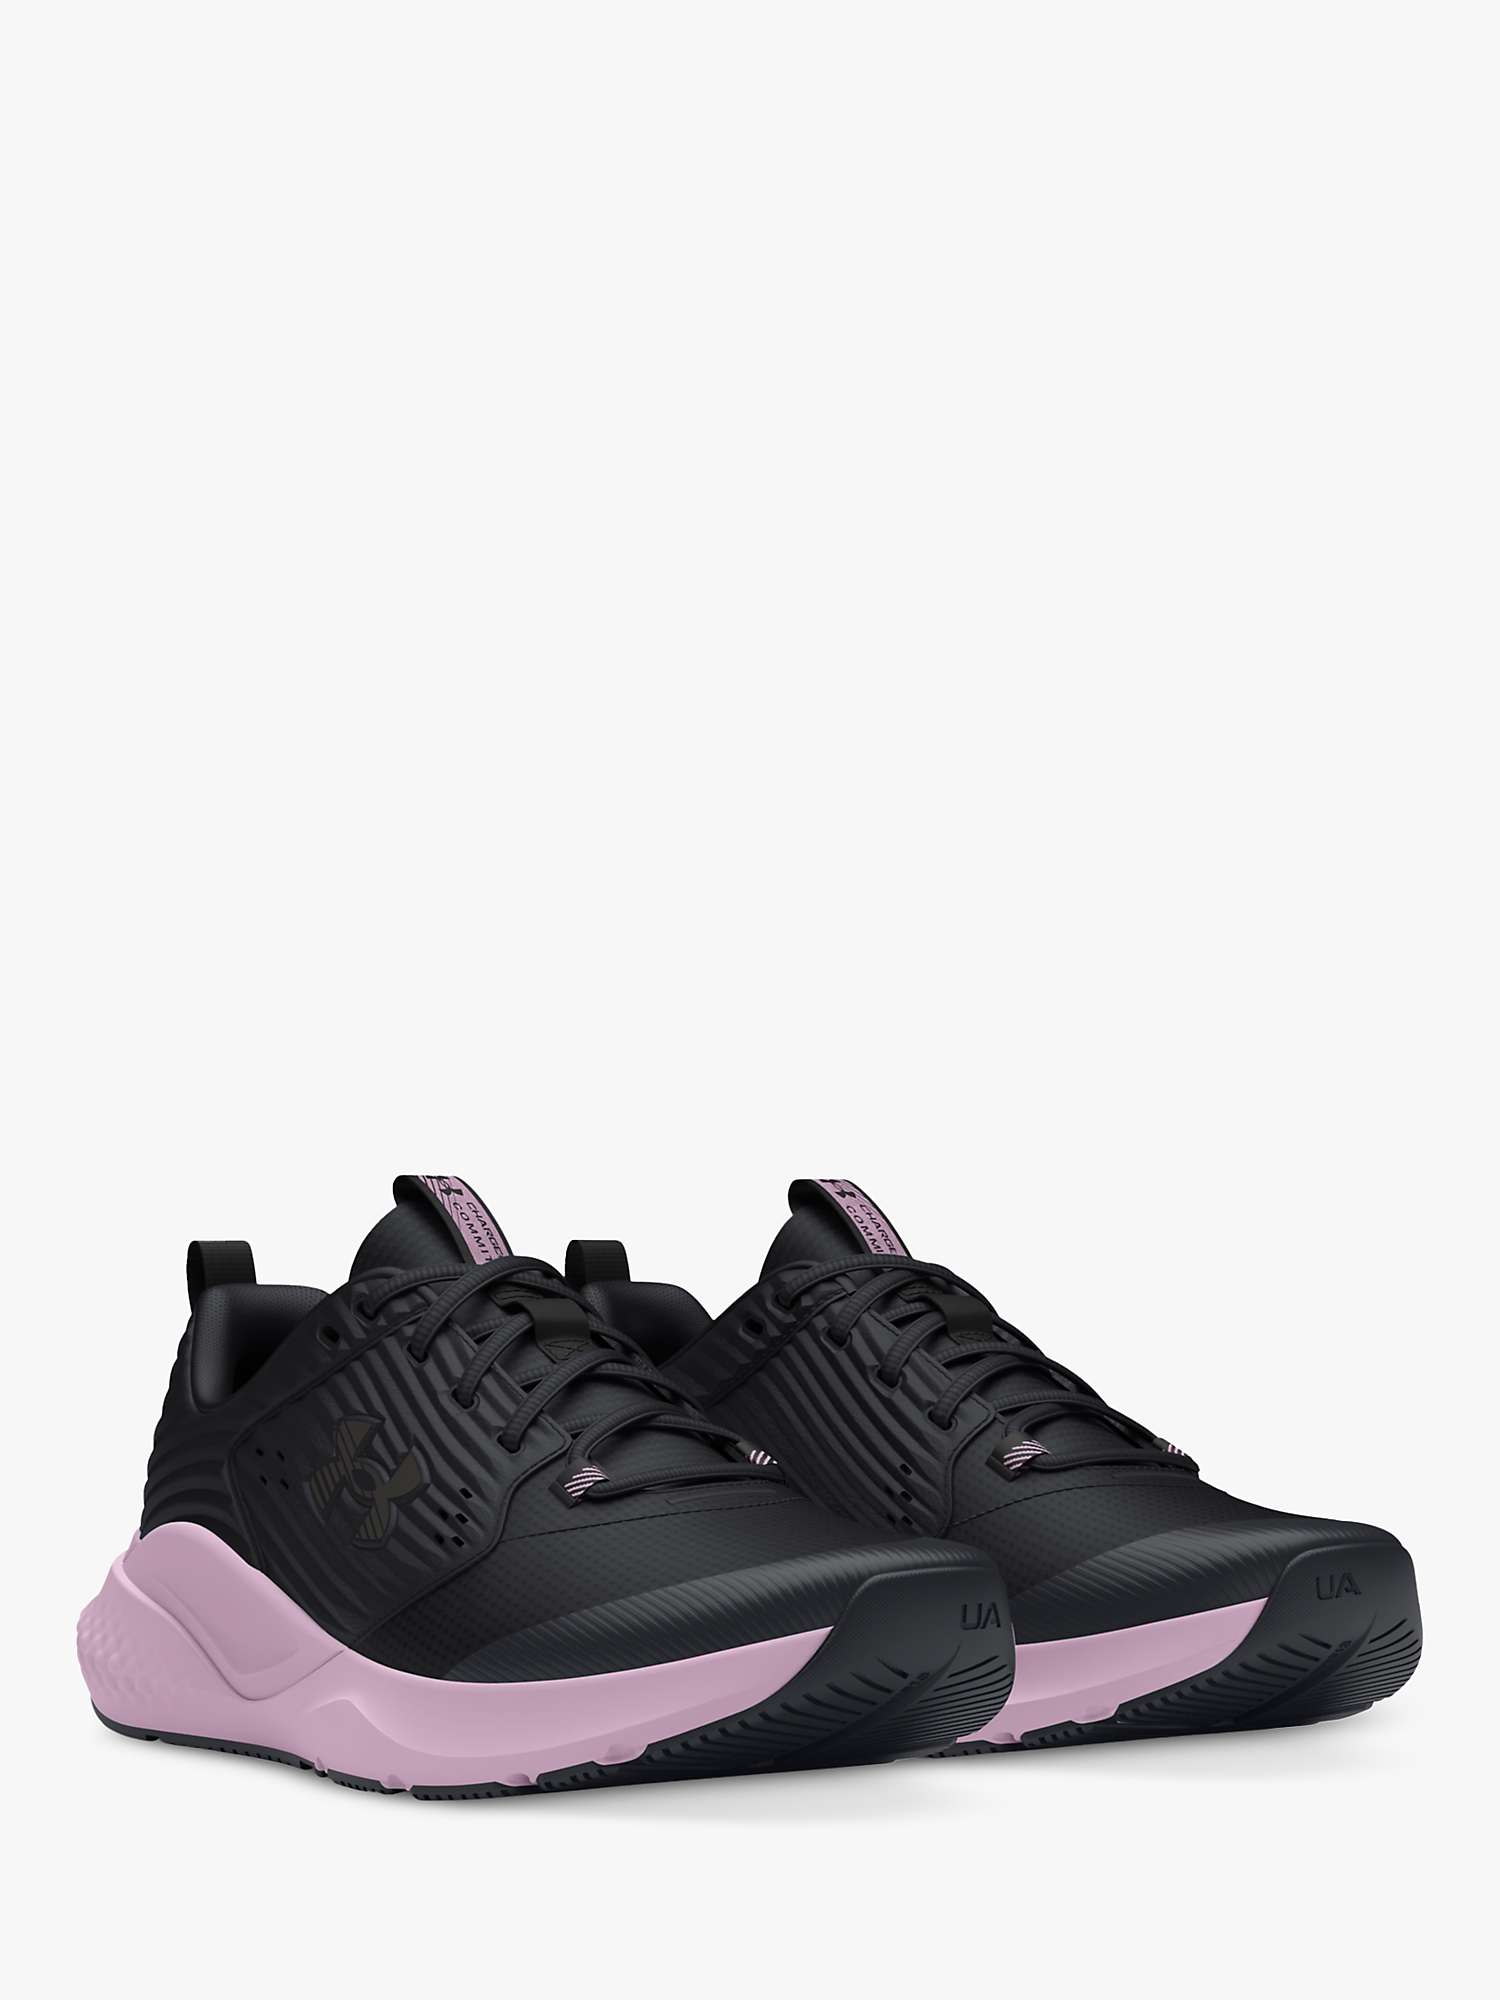 Buy Under Armour Charged Women's Sports Shoes, Black/Purple Online at johnlewis.com